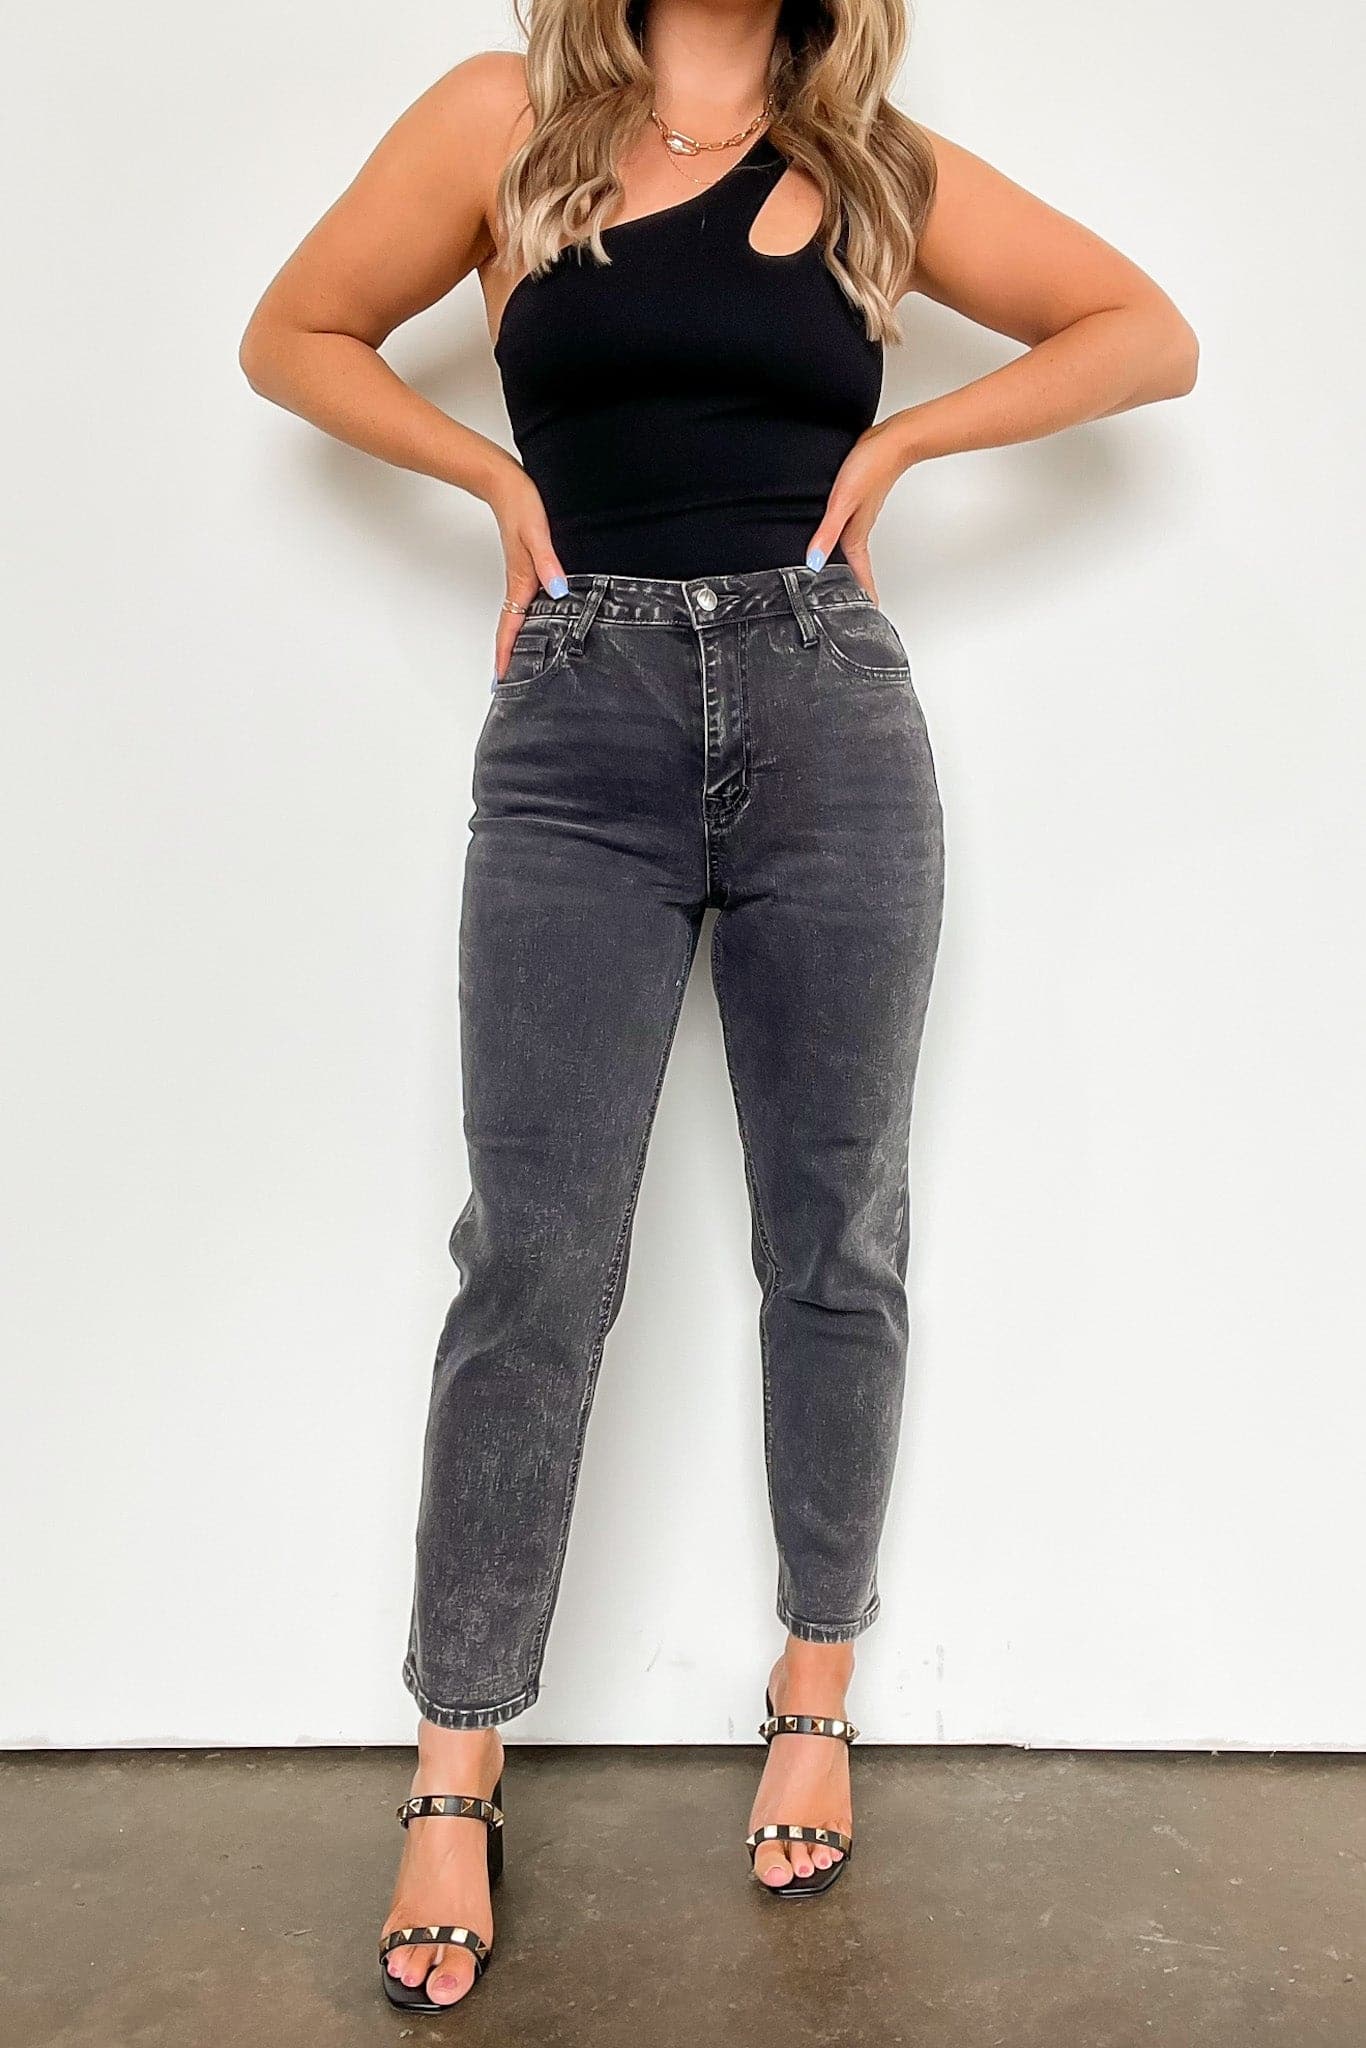 1 / Black Shaynna High Waist Washed Straight Leg Jeans - BACK IN STOCK - Madison and Mallory